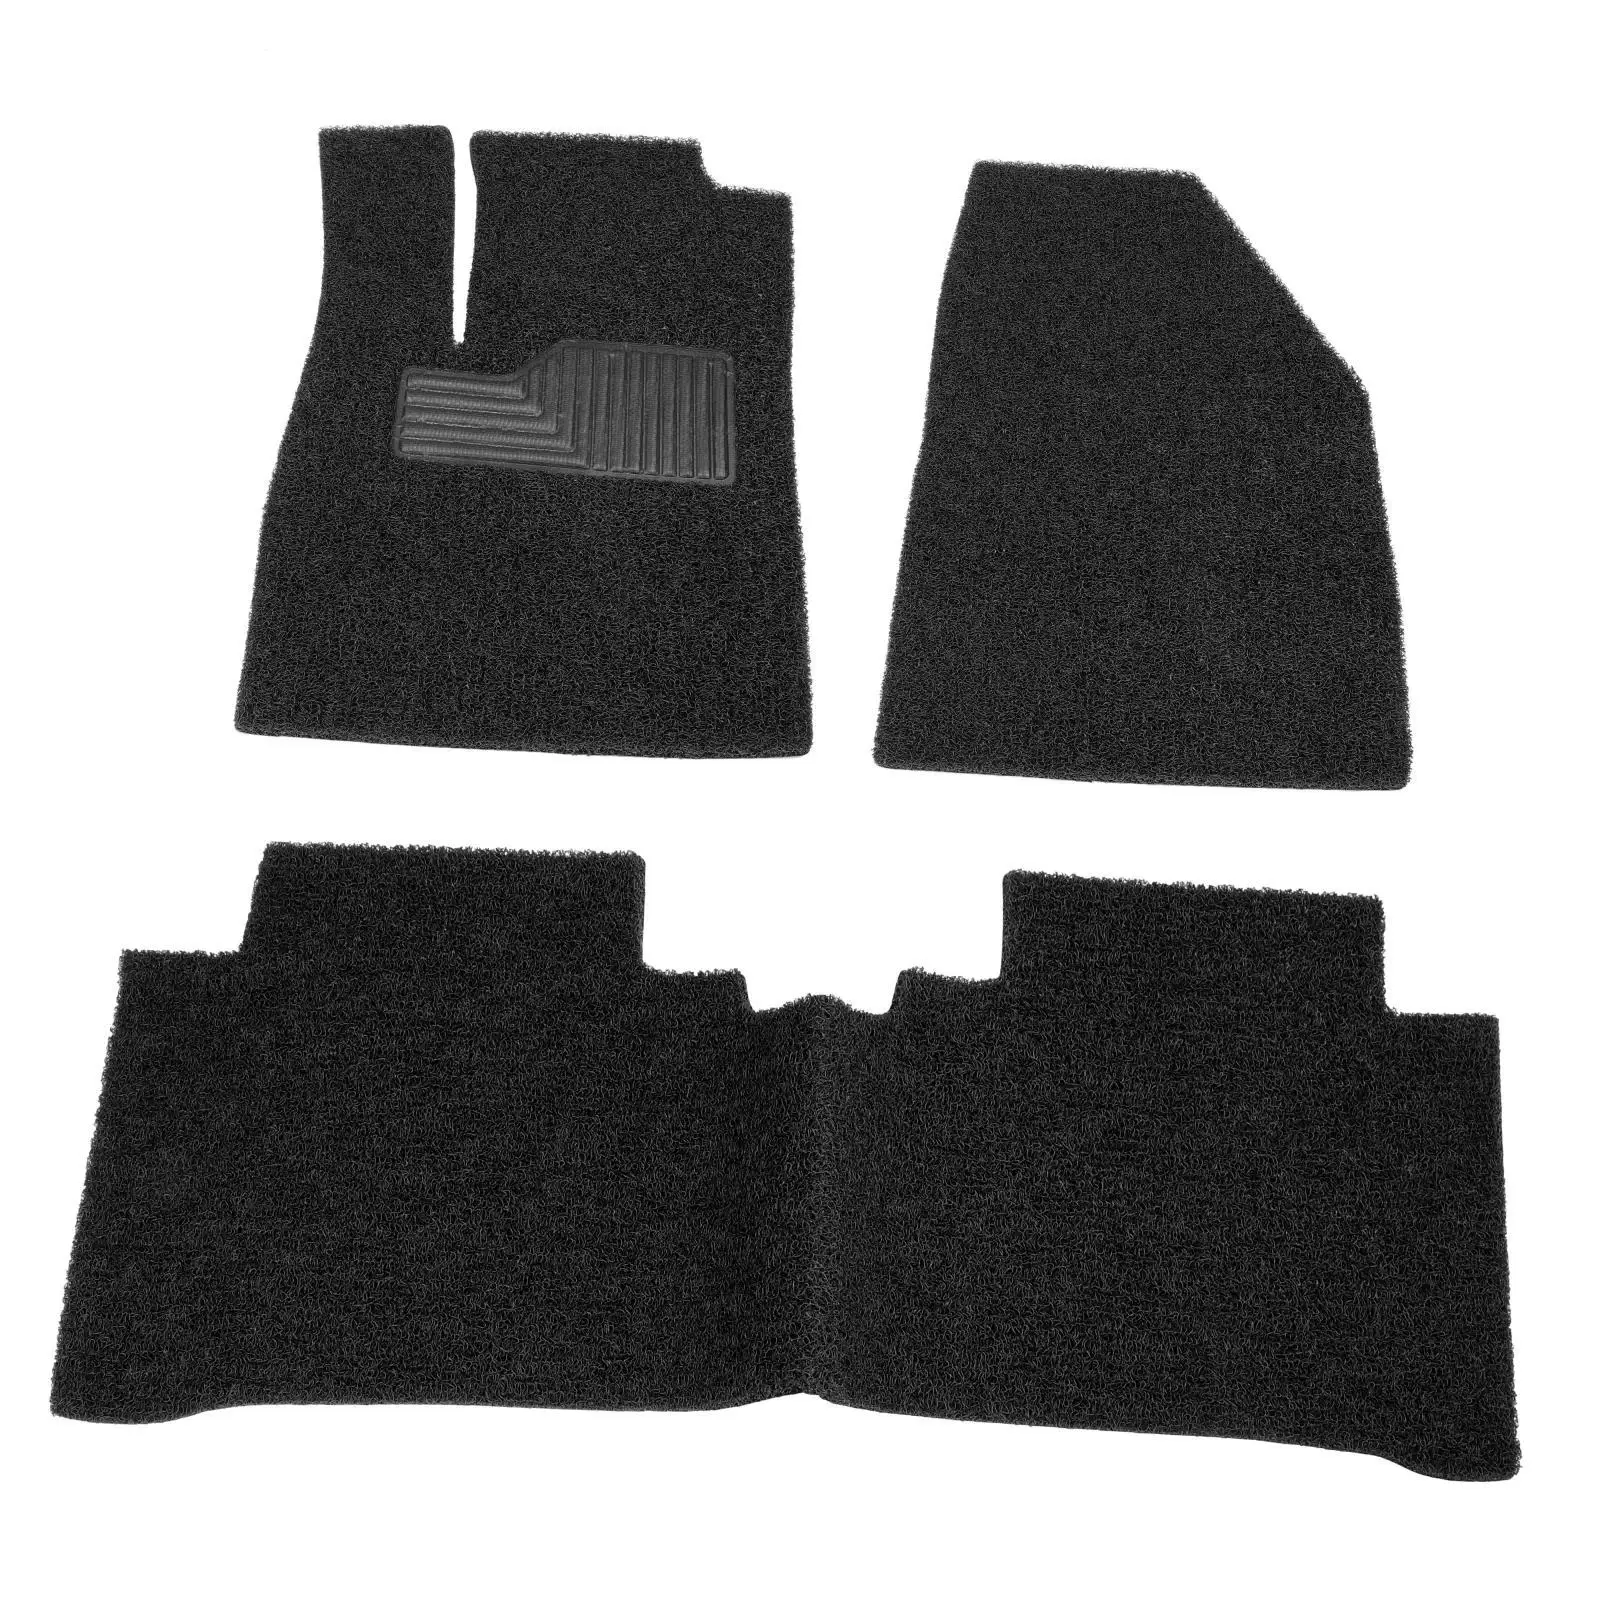 3Pcs Car Floor Mats Easy to Clean Protection Wear Resistant Carpets Footpads PVC for Byd Yuan Plus Atto 3 21-23